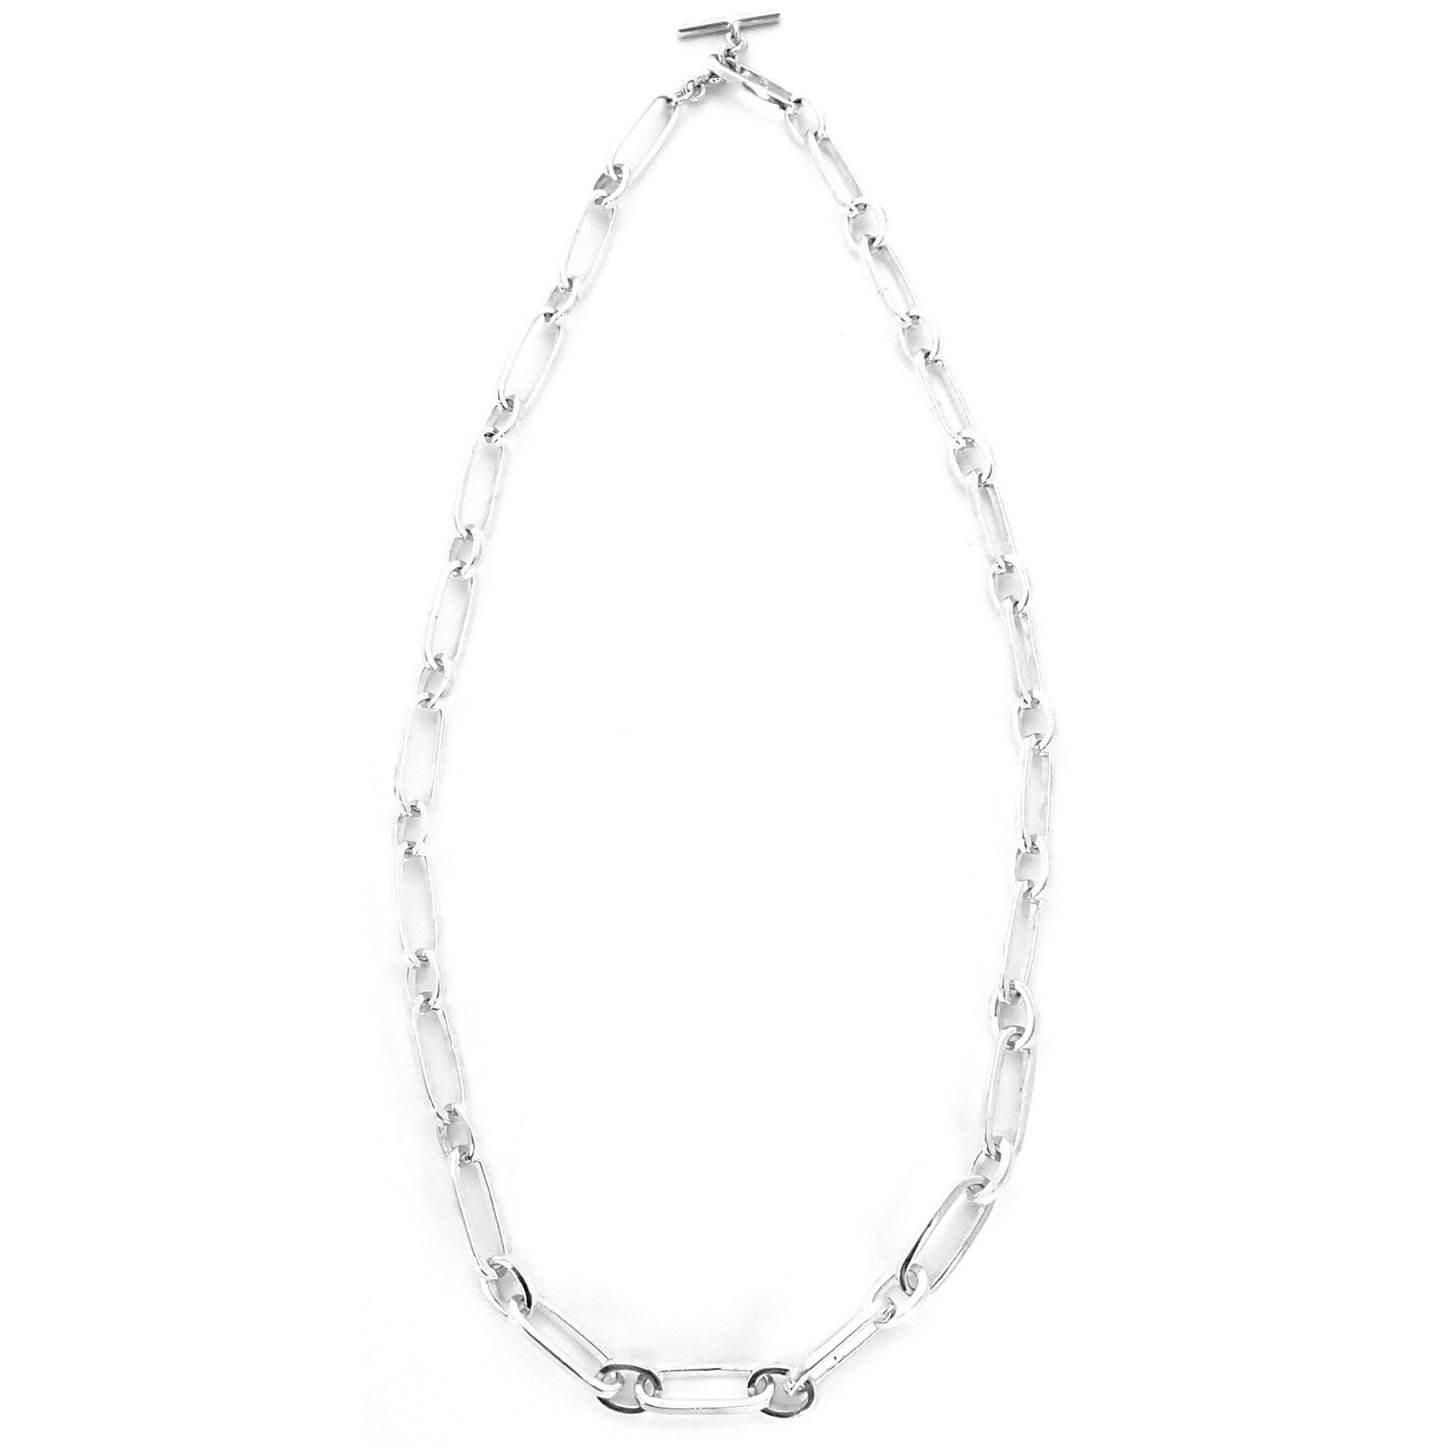 N727 .925 Sterling Silver Toggle Chain Necklace with Alternating Oval and Round Links